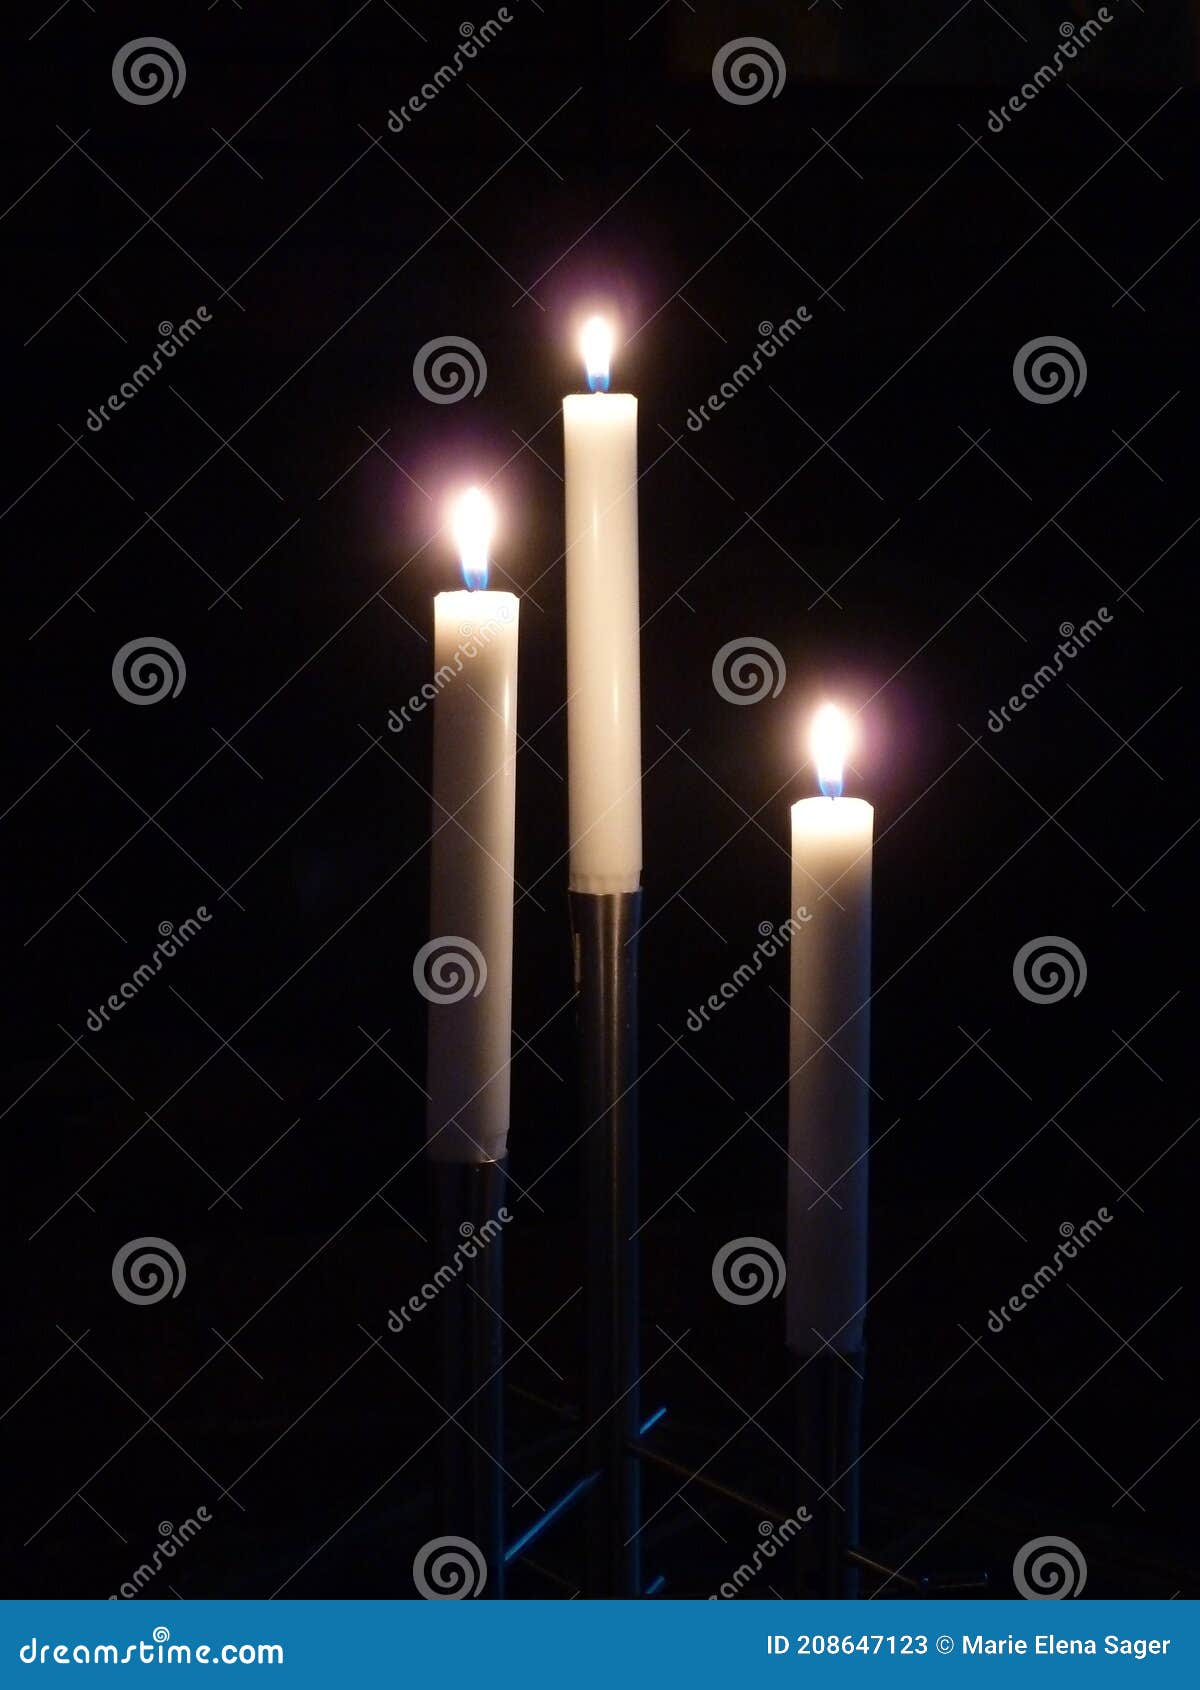 Three Long Lit White Candles Stock Image - Image of candles, white ...